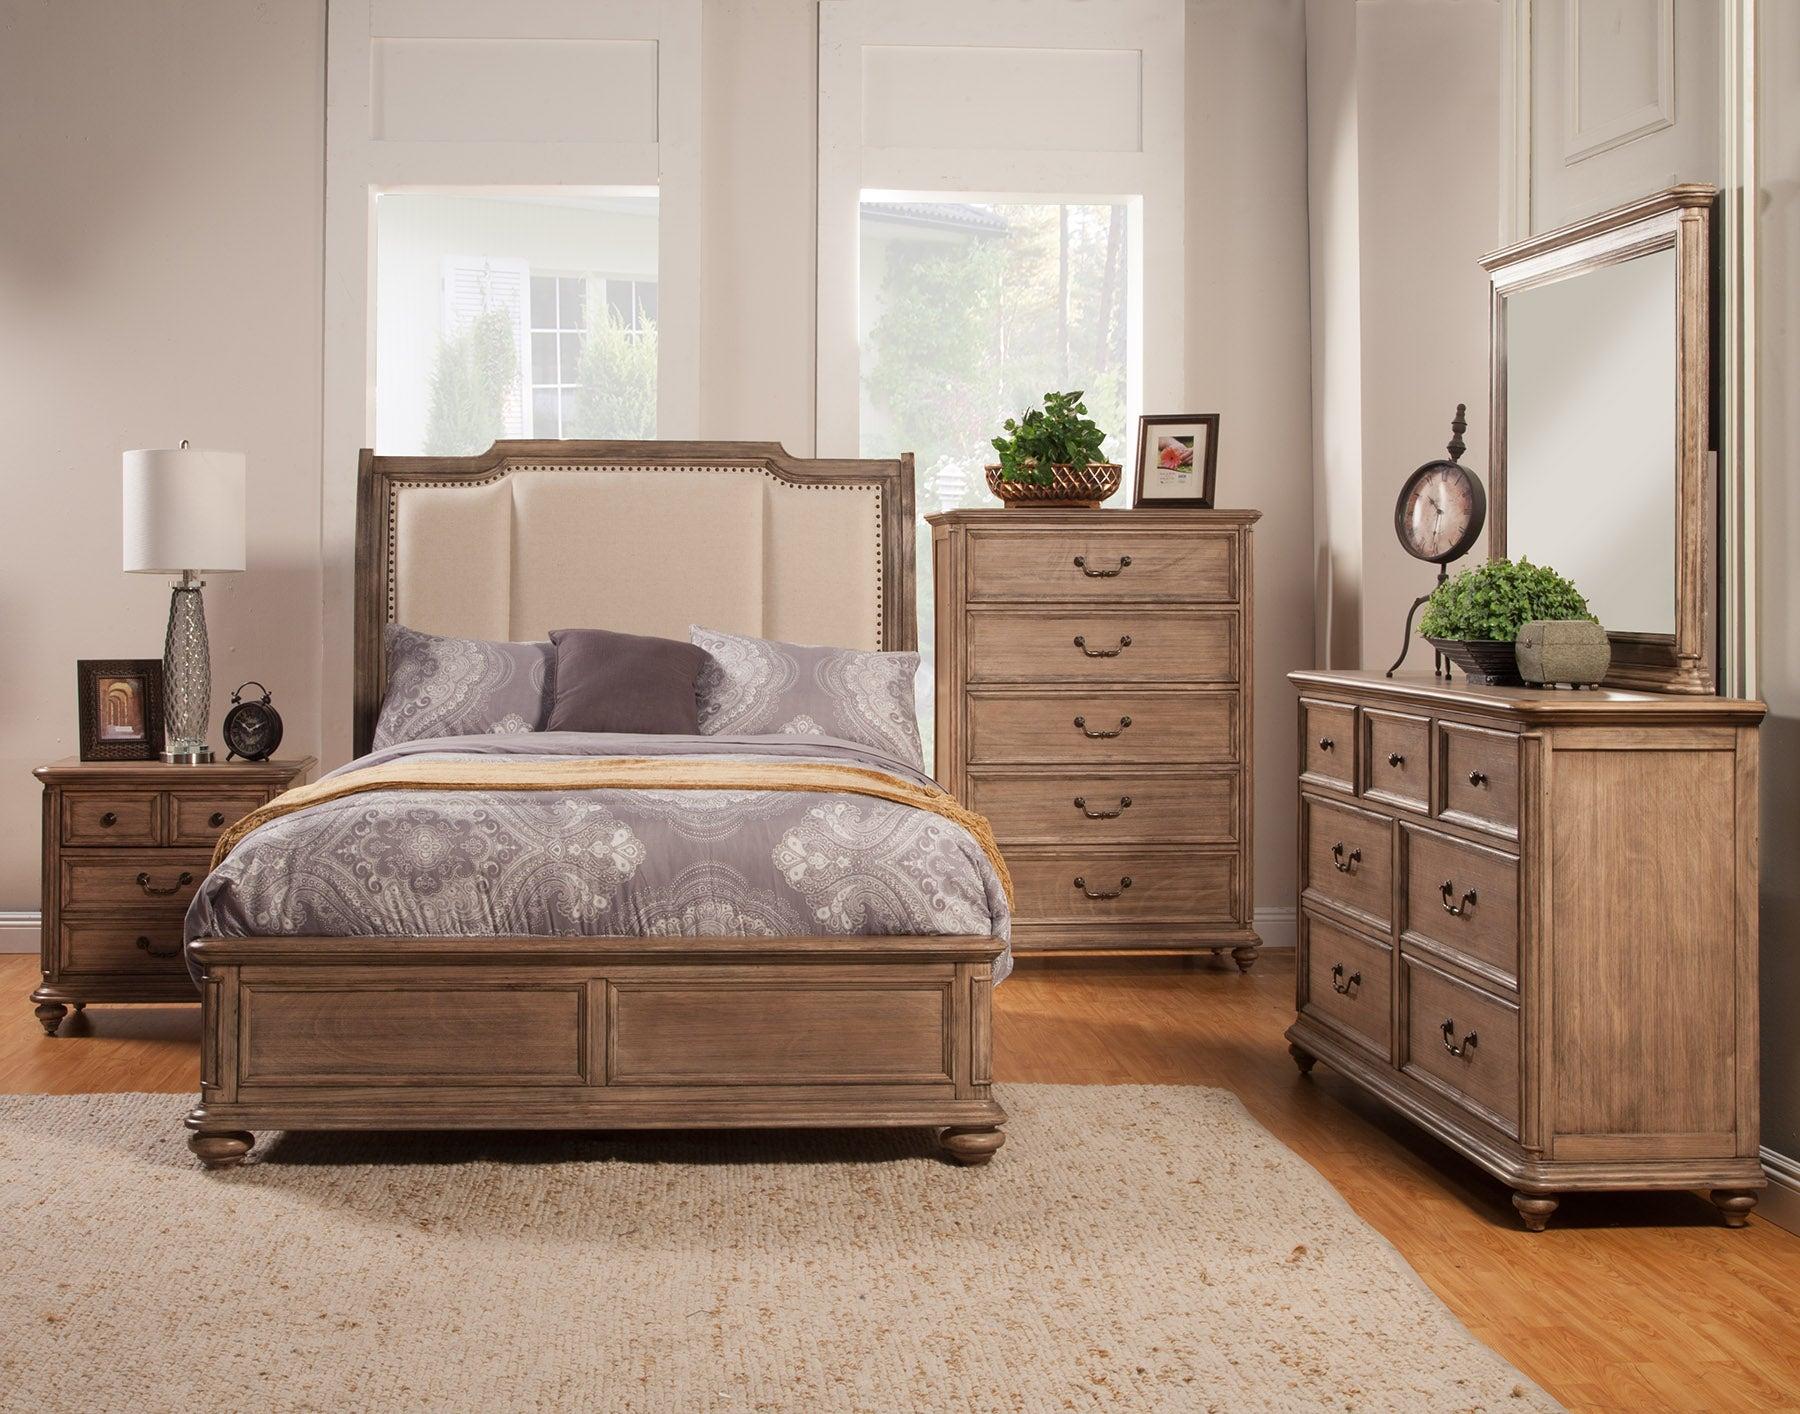 

    
Truffle Queen Upholstered Sleigh Bedroom Set 5 MELBOURNE ALPINE Traditional
